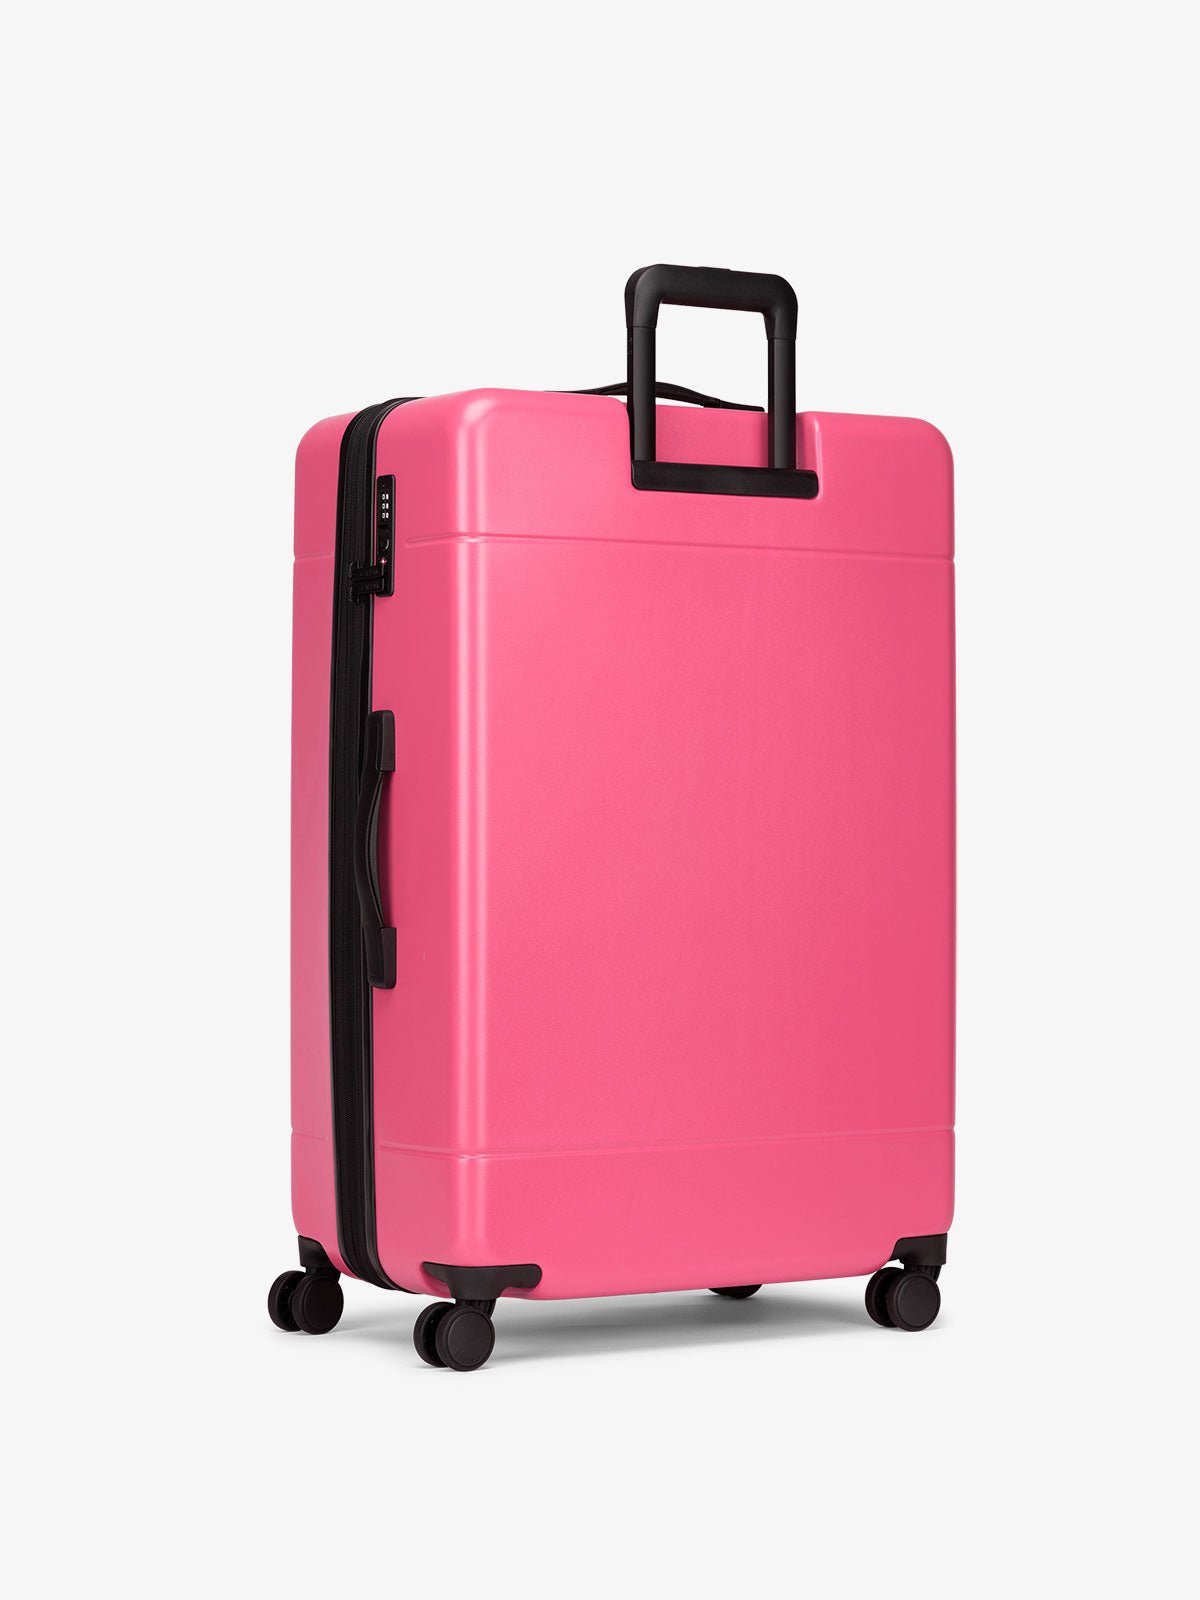 Hue large 28 inch durable hard shell polycarbonate luggage in hot pink dragonfruit